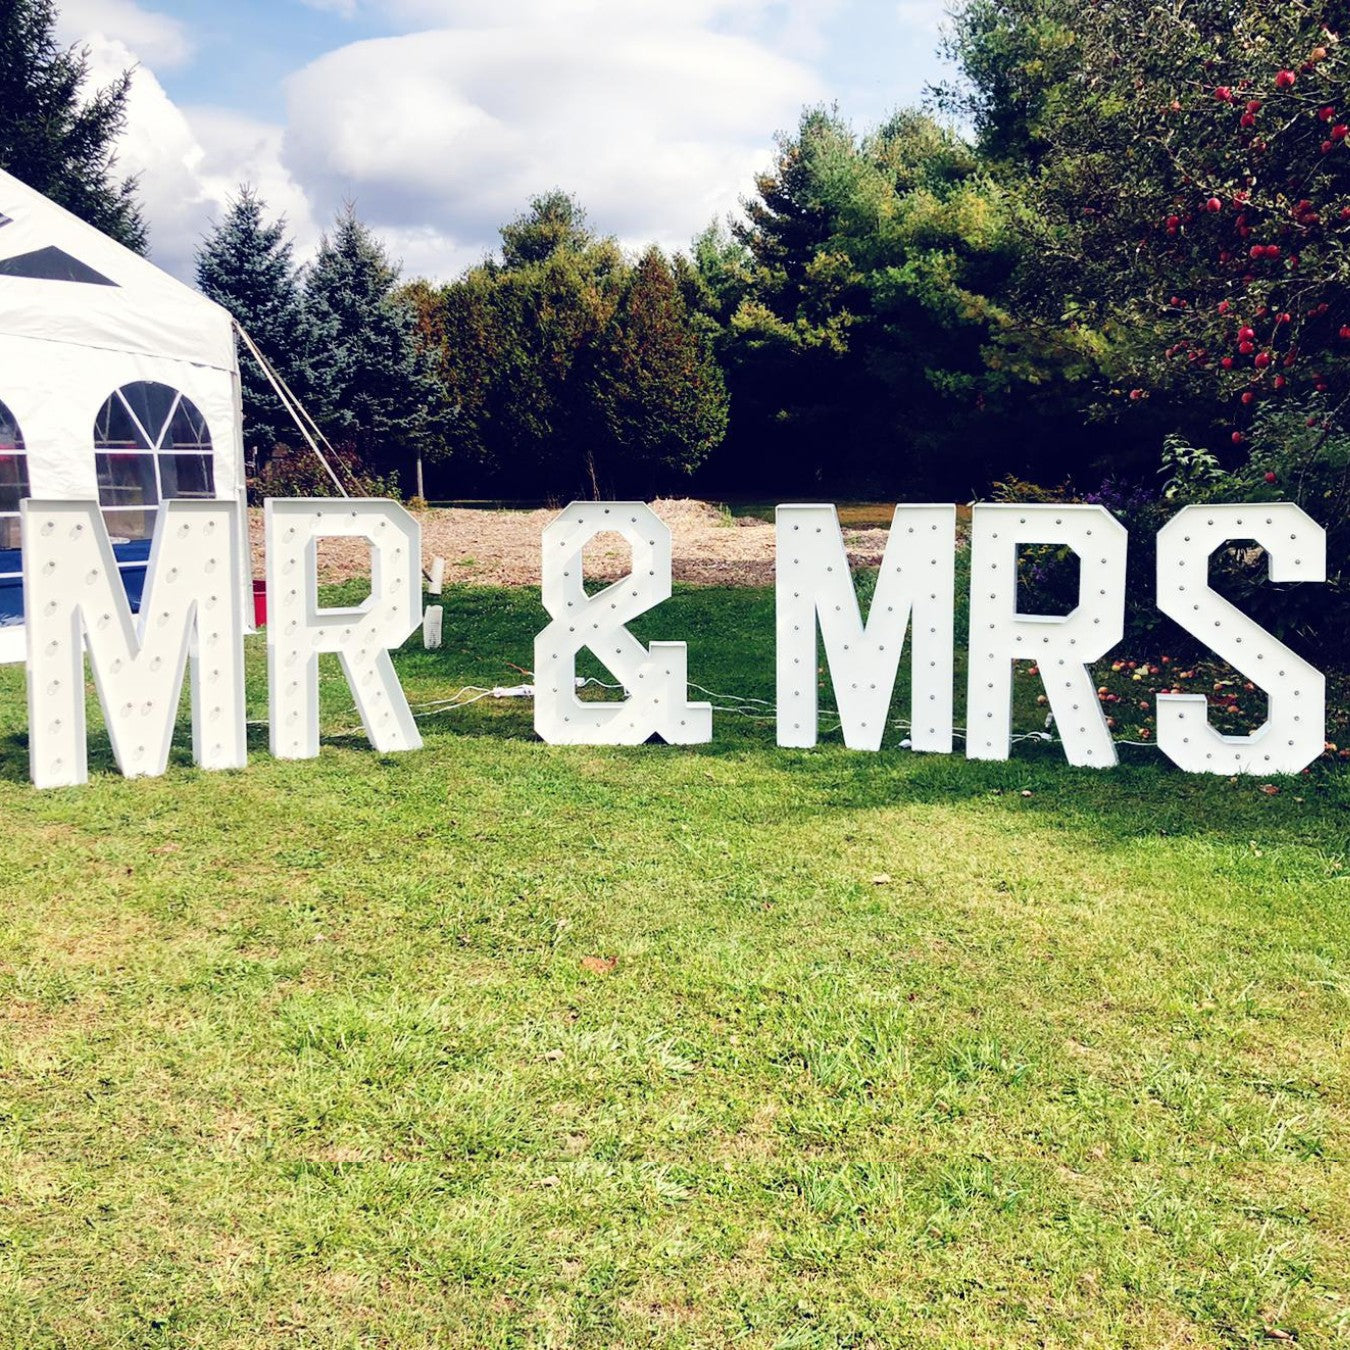 Mr & Mrs Marquee Letters